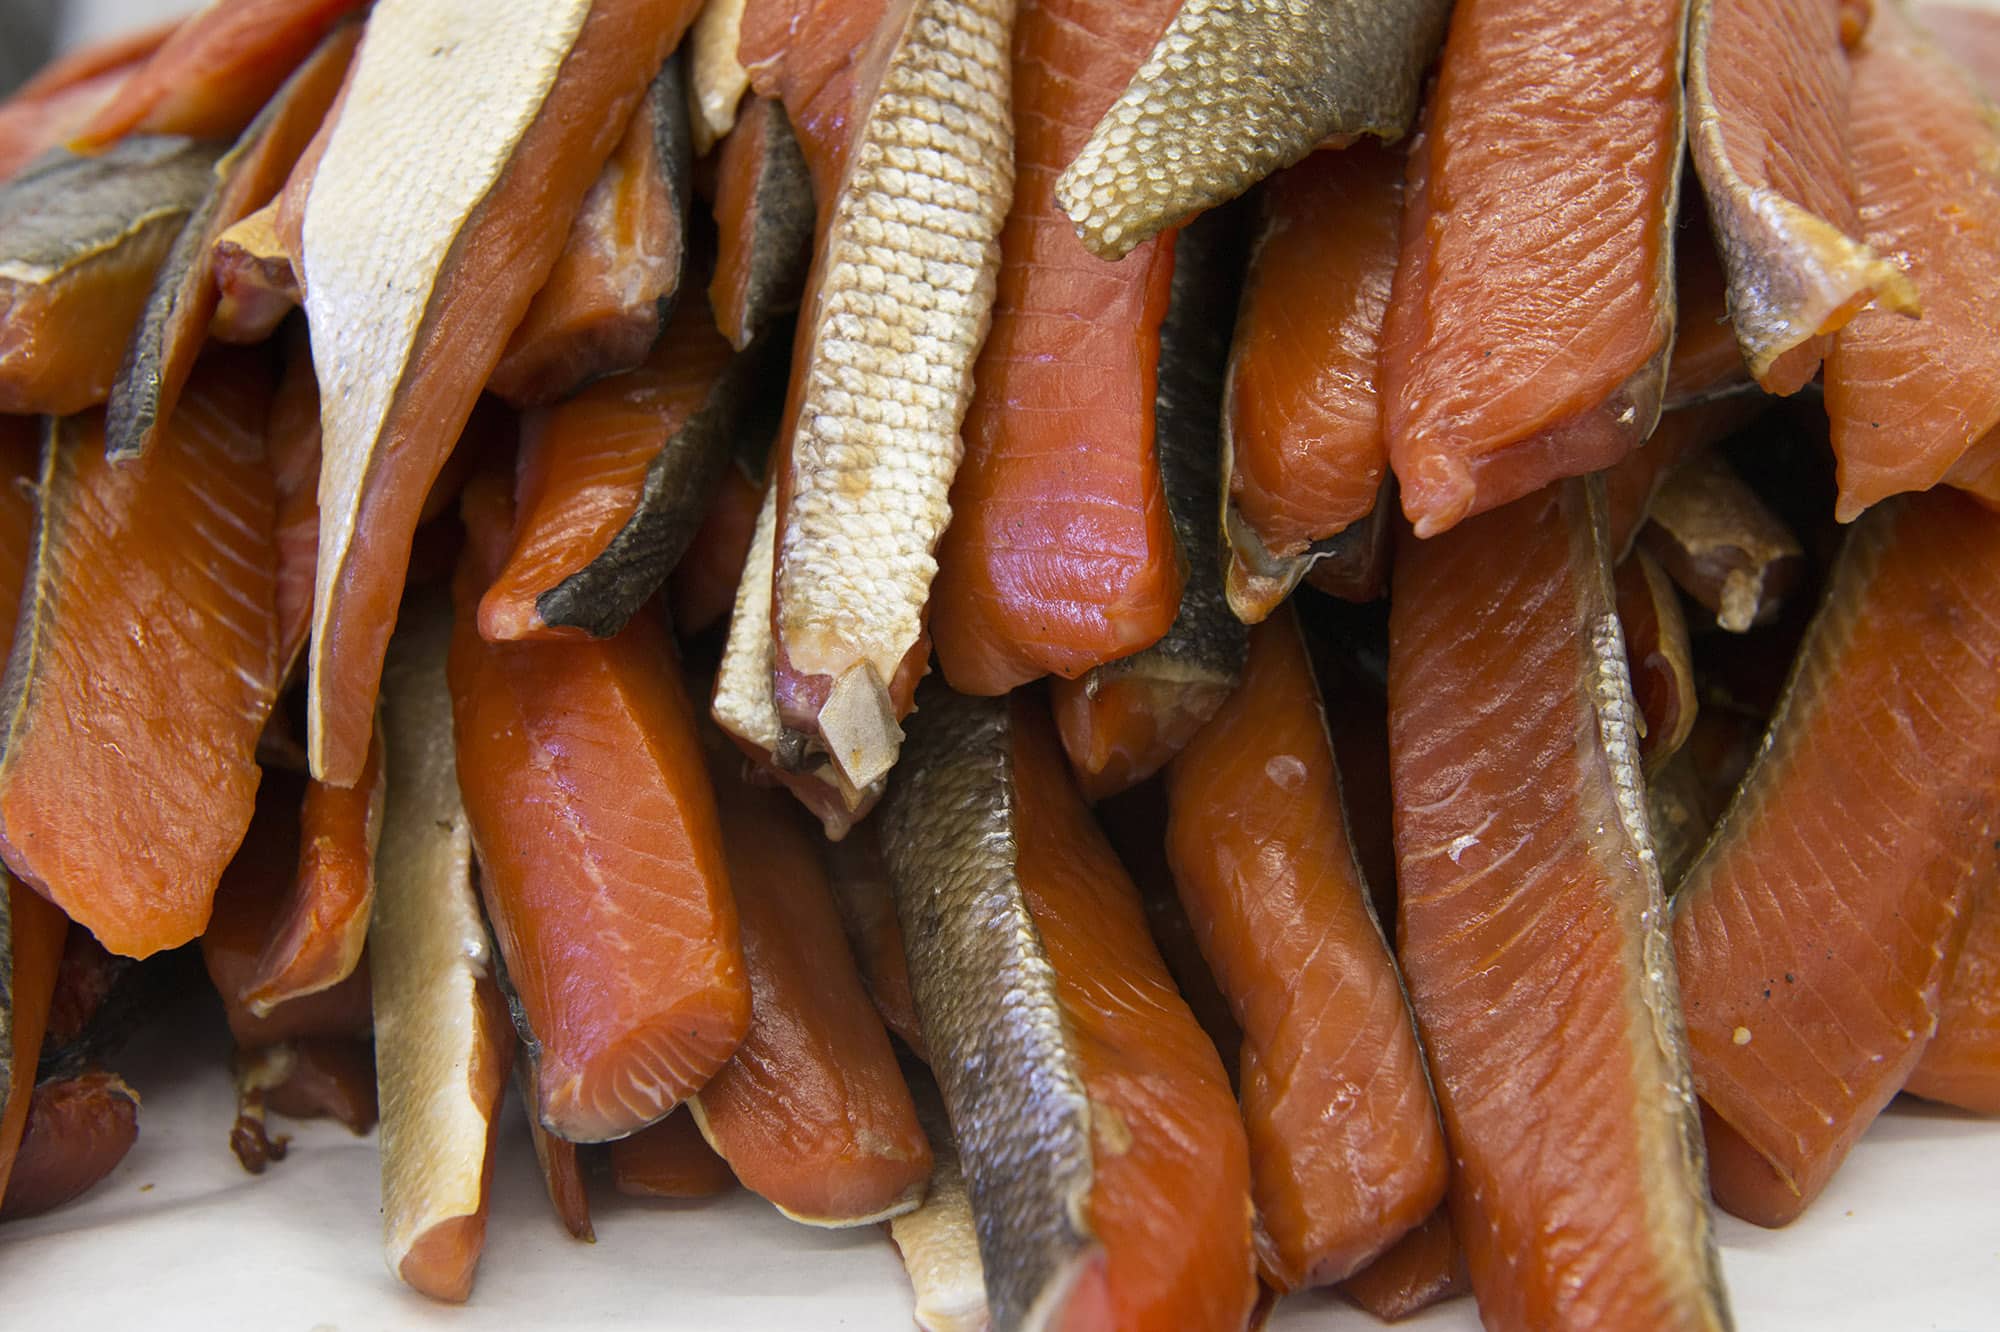 Smoked salmon, harvested from the tribal net, will be cut and canned.